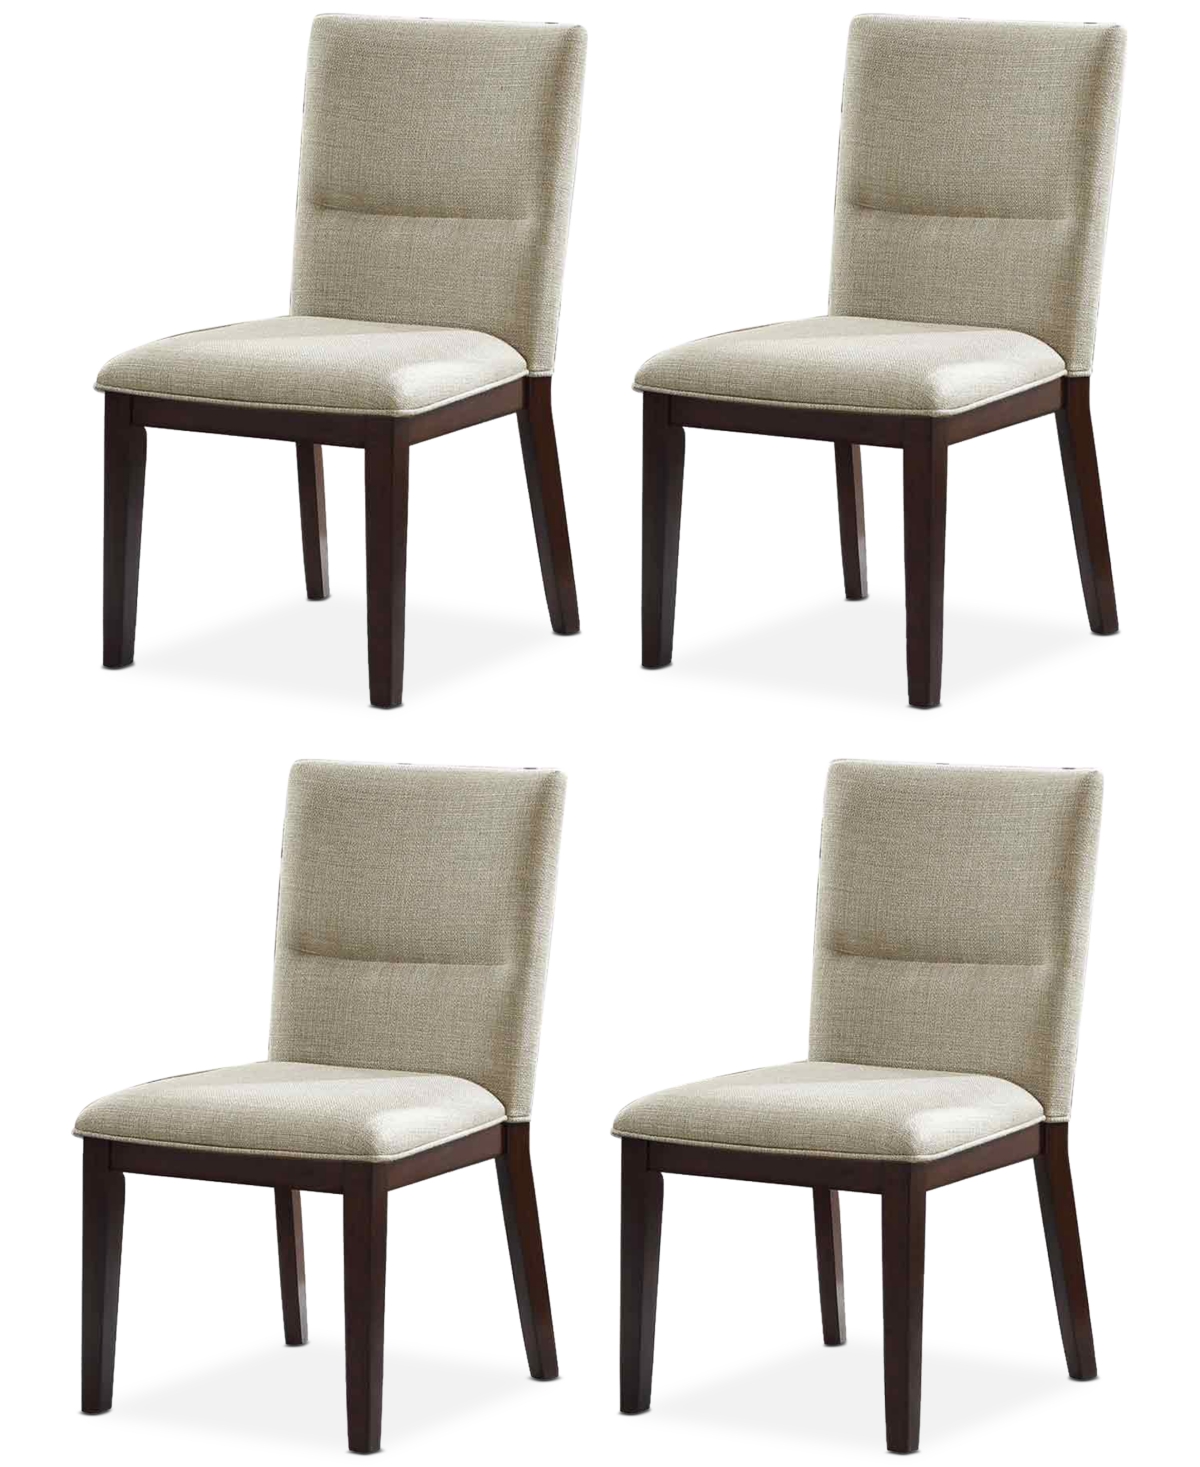 Furniture Amy Grey Dining Chair, 4-pc. Set (4 Side Chairs)